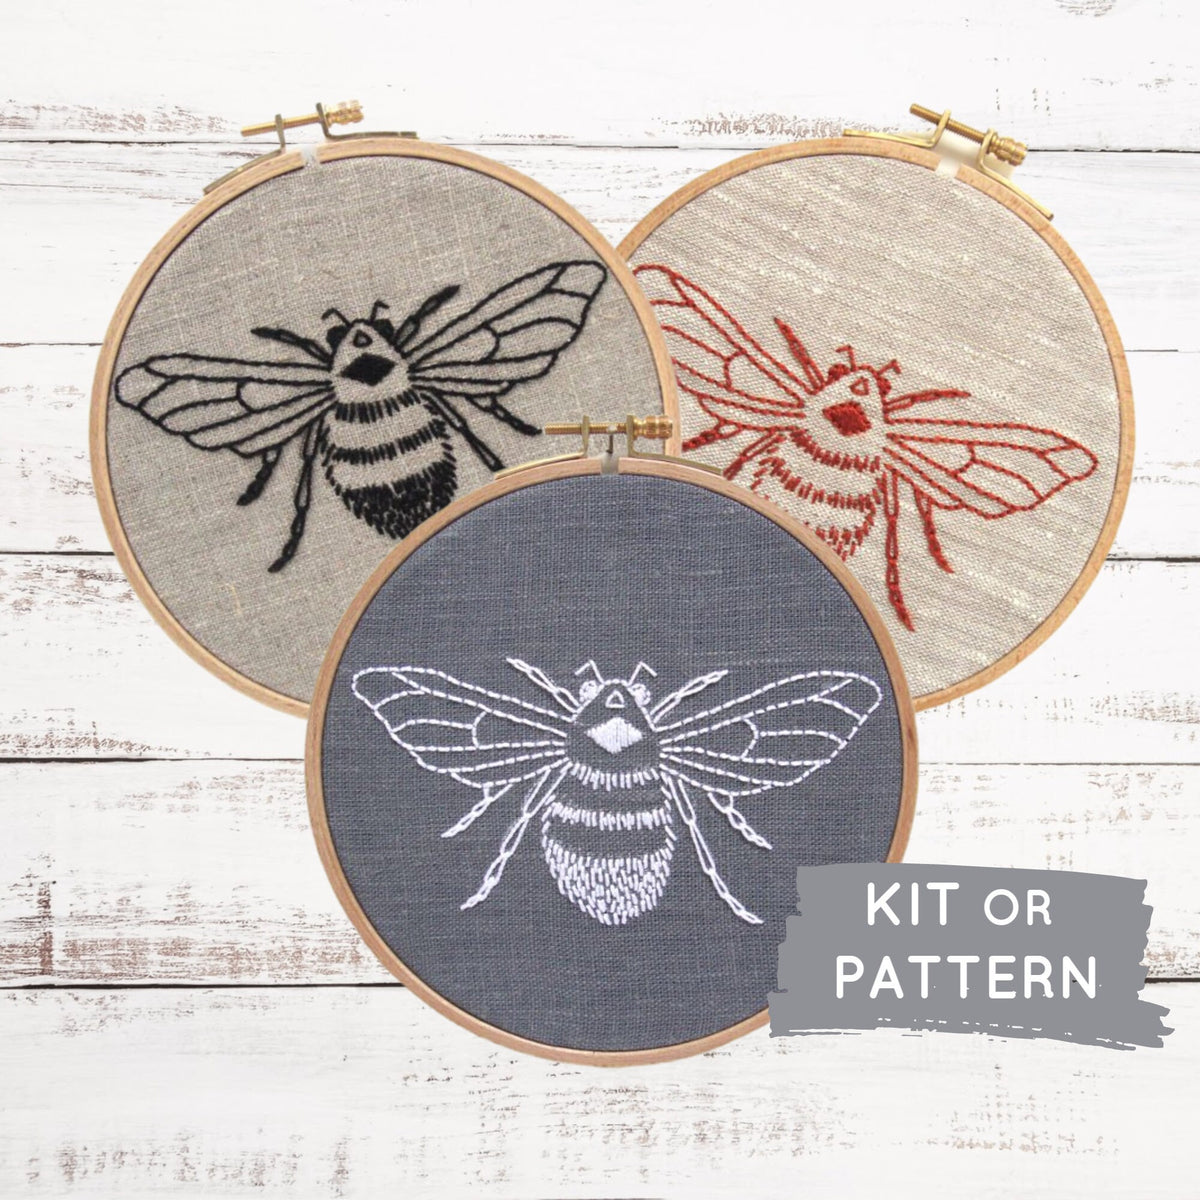 DIY embroidery KIT, bumblebee embroidery pattern, modern hand embroidery pattern, beginner embroidery kit, embroidery kit, easy embroidery